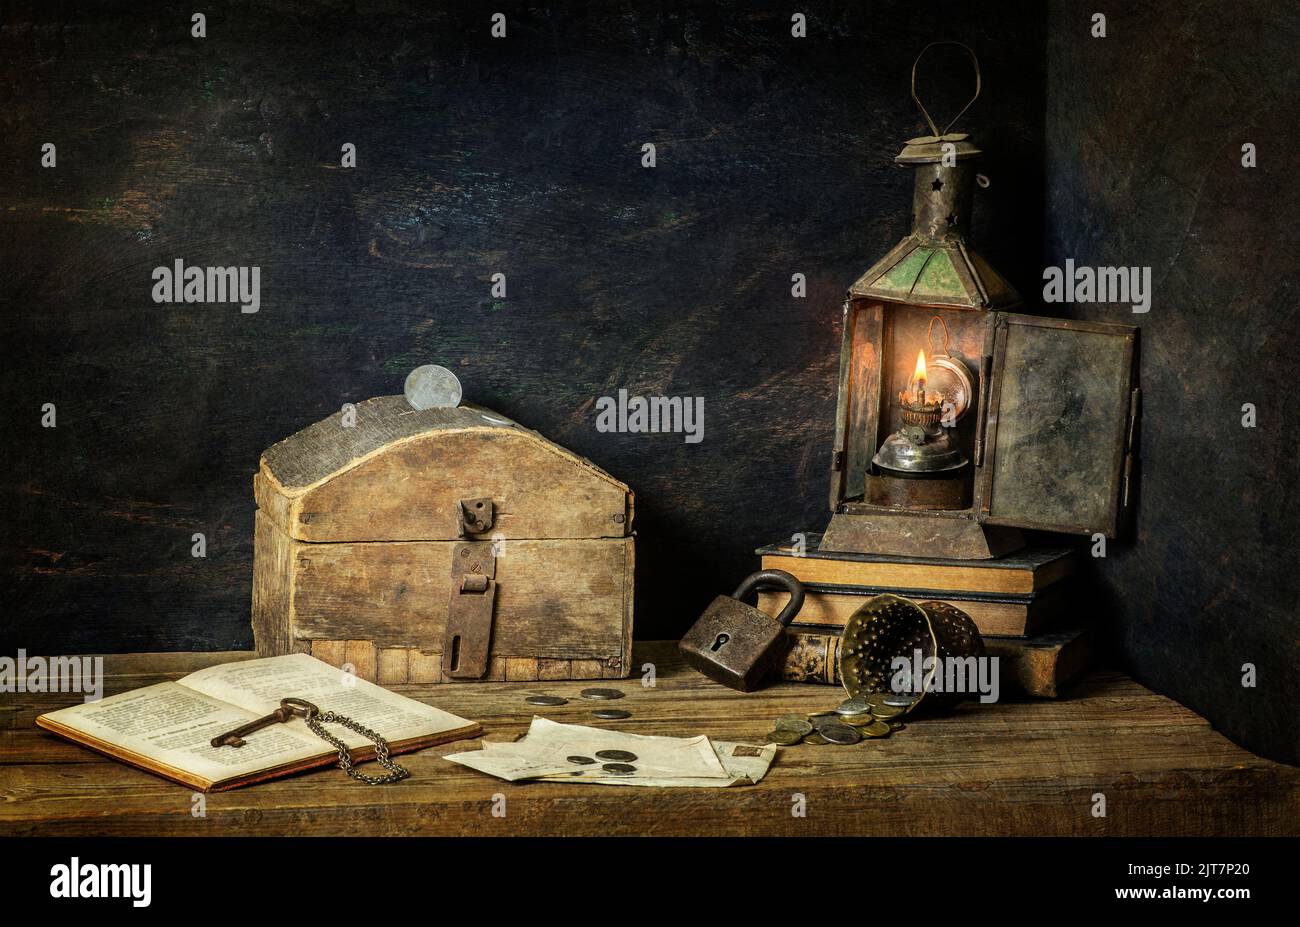 Classic still life with old savings box placed with vintage lamp, old books. coins, key and lock on rustic wooden background. Stock Photo